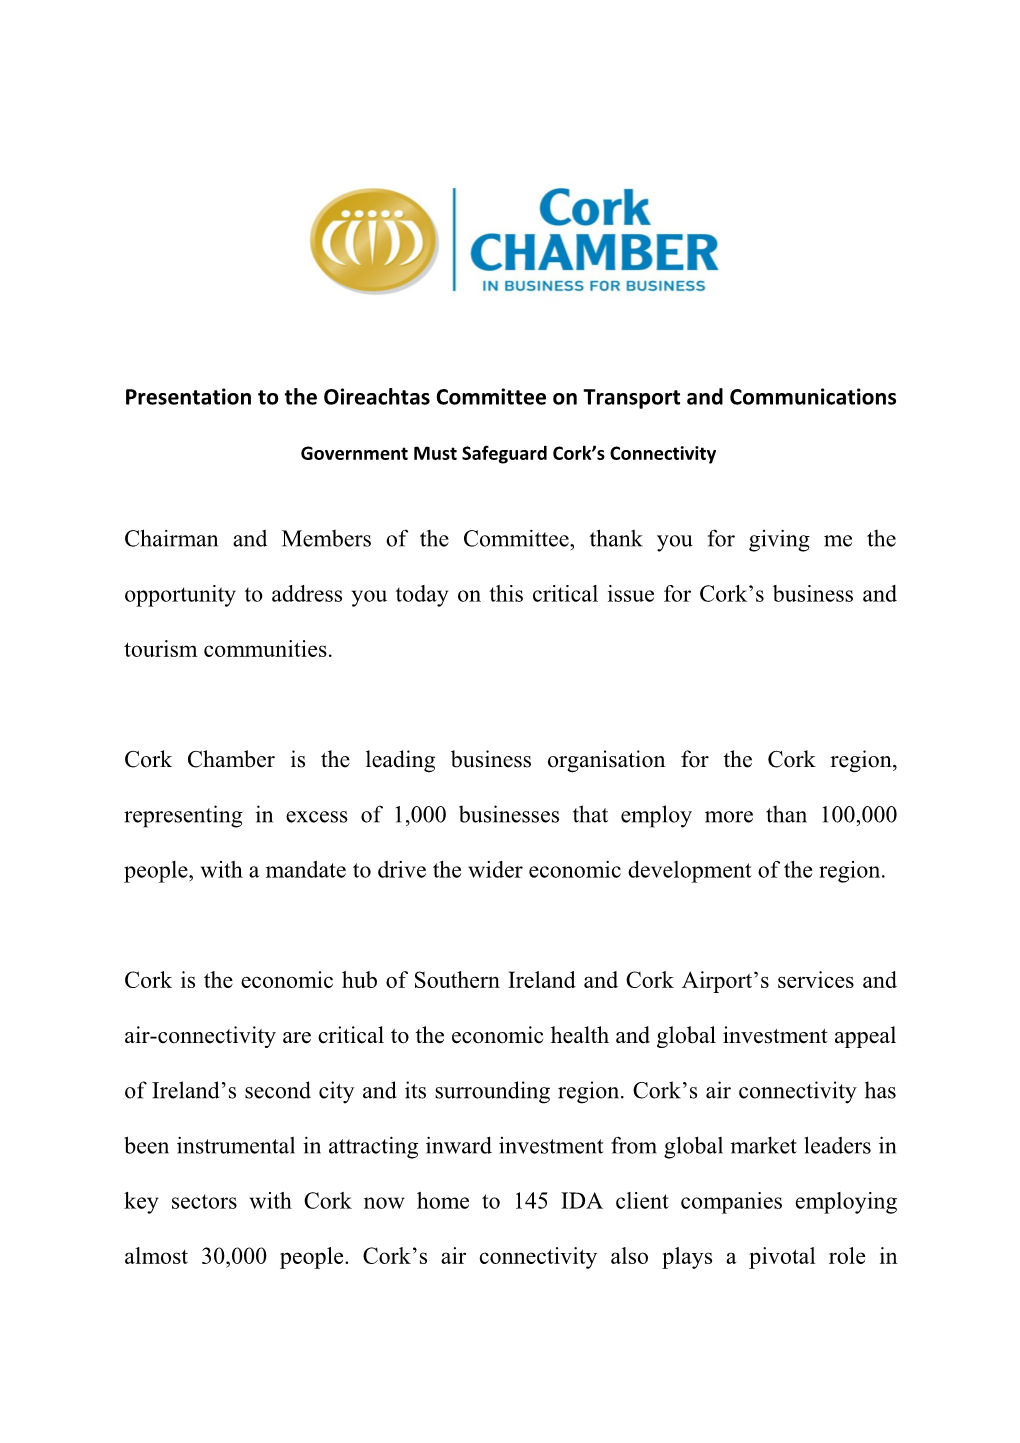 Presentation to the Oireachtas Committee on Transport and Communications